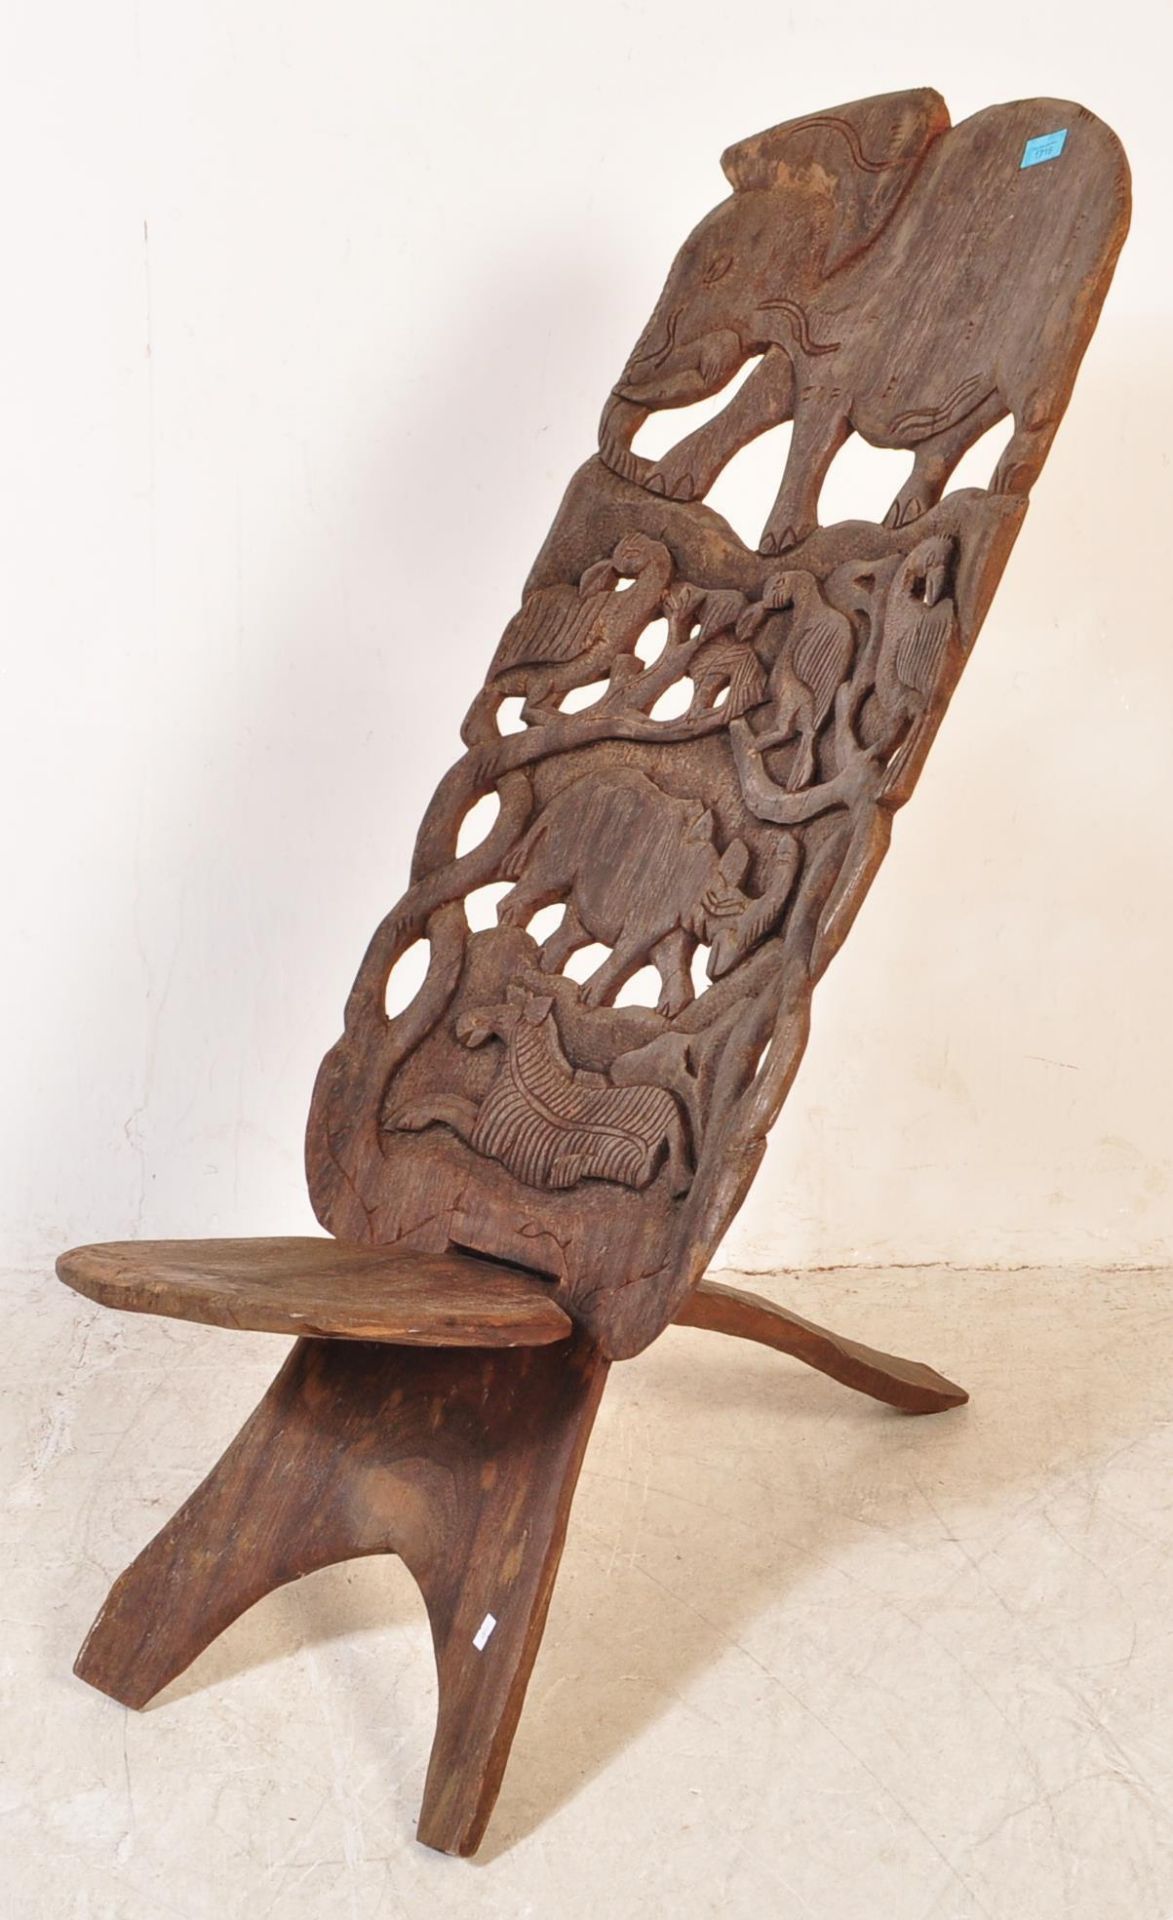 EARLY 20TH CENTURY HARDWOOD AFRICAN BIRTHING CHAIR